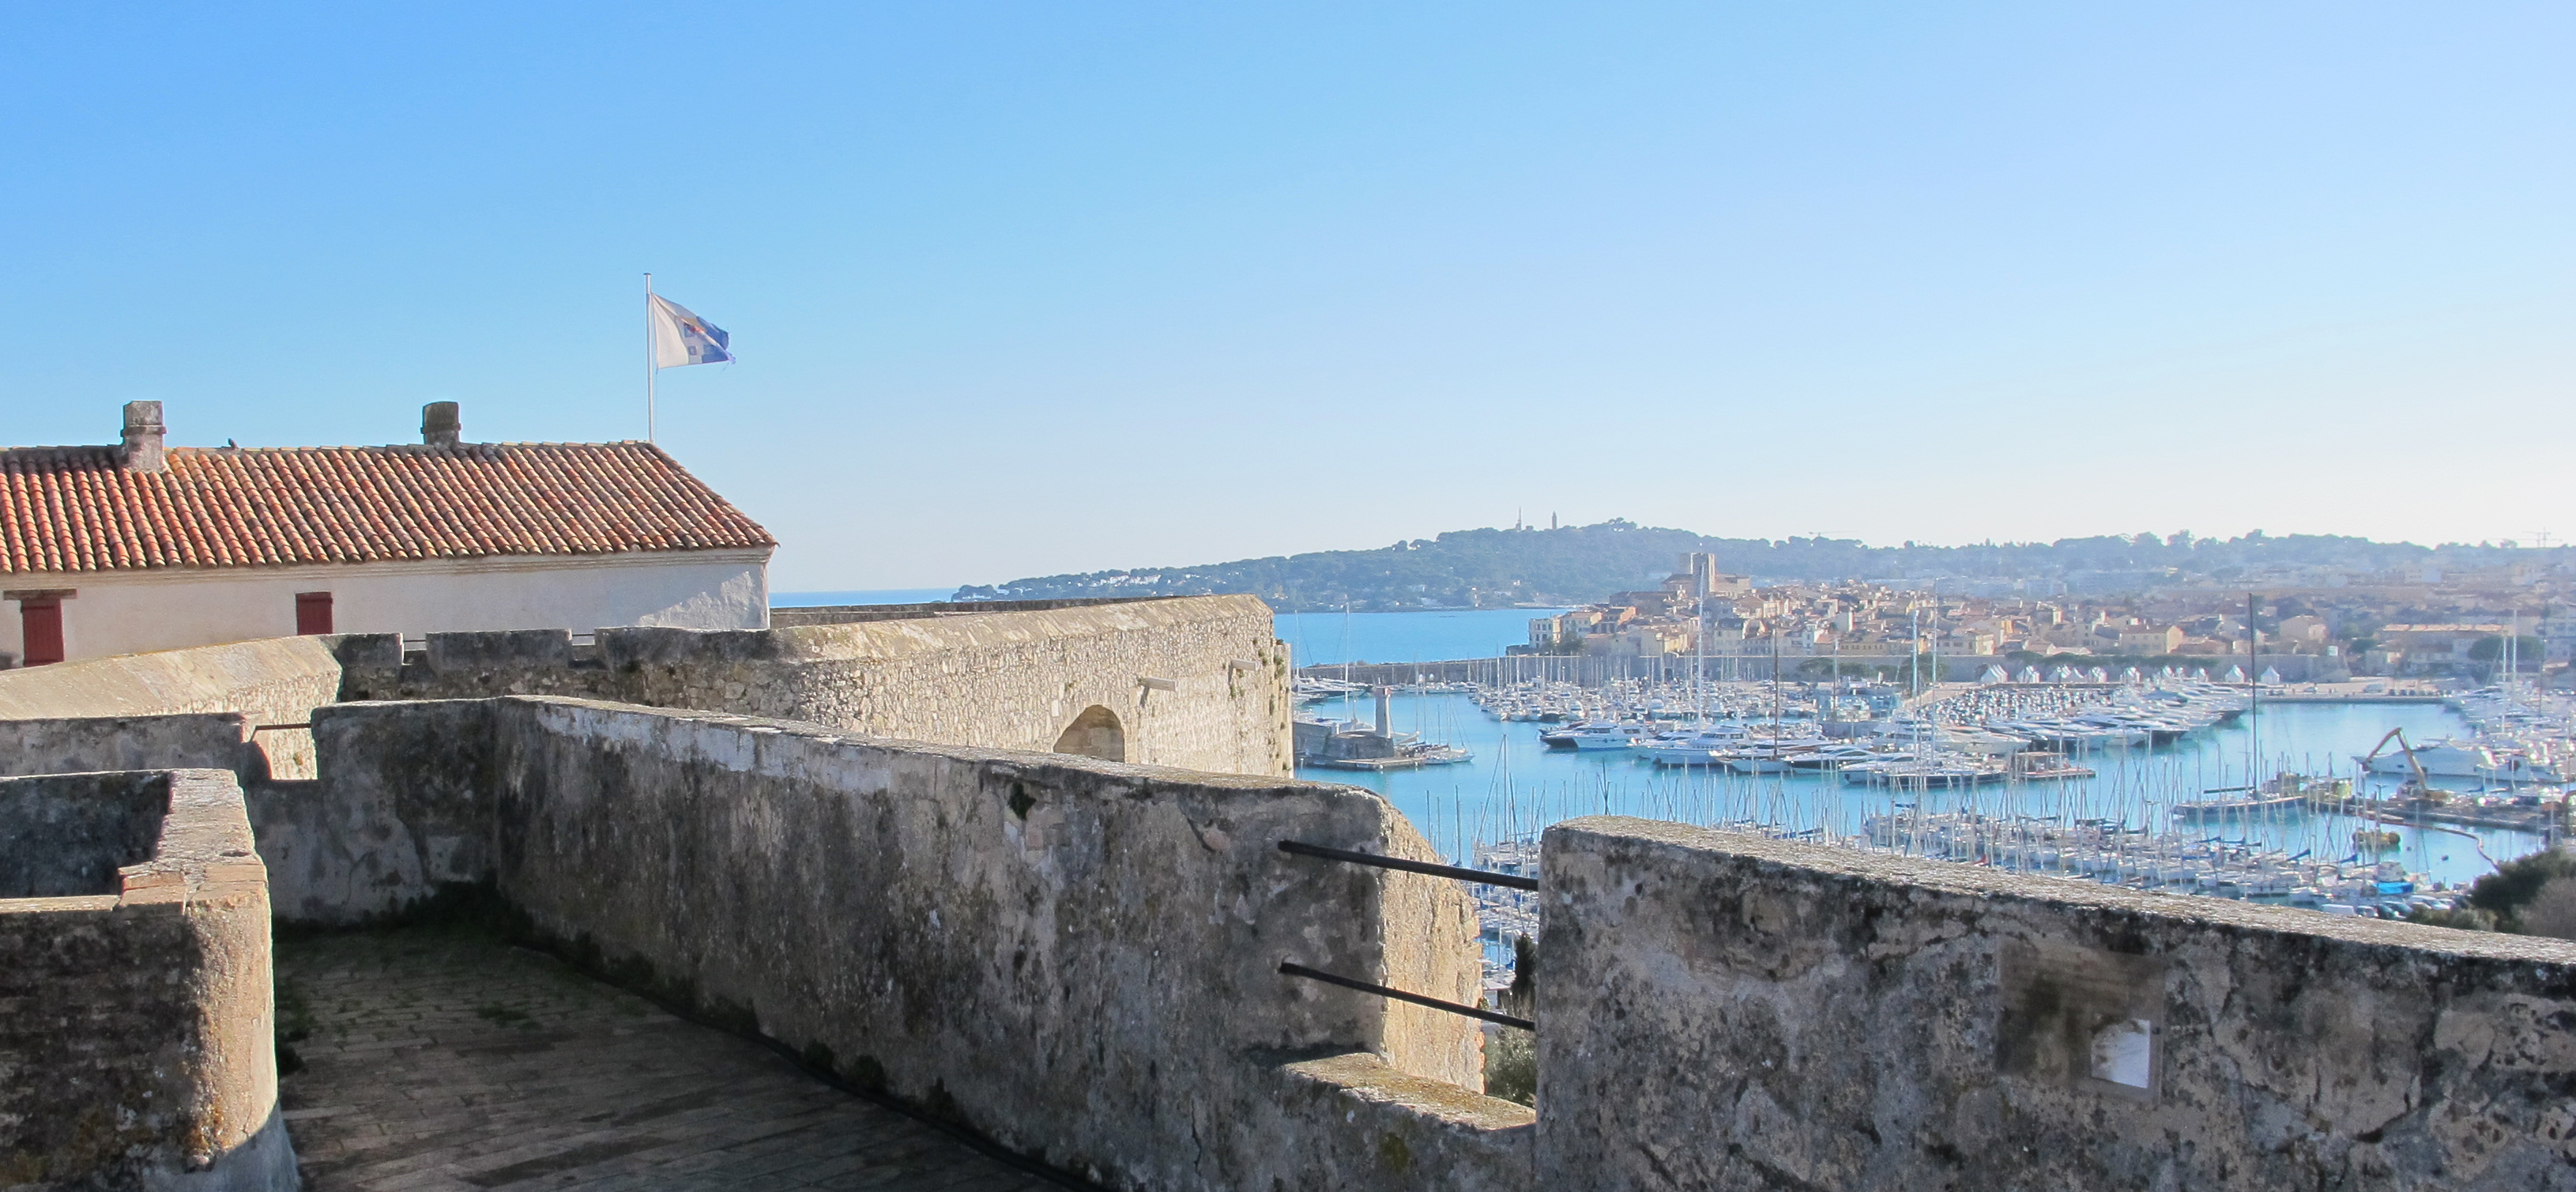 Antibes old town: view from the Fort Carré